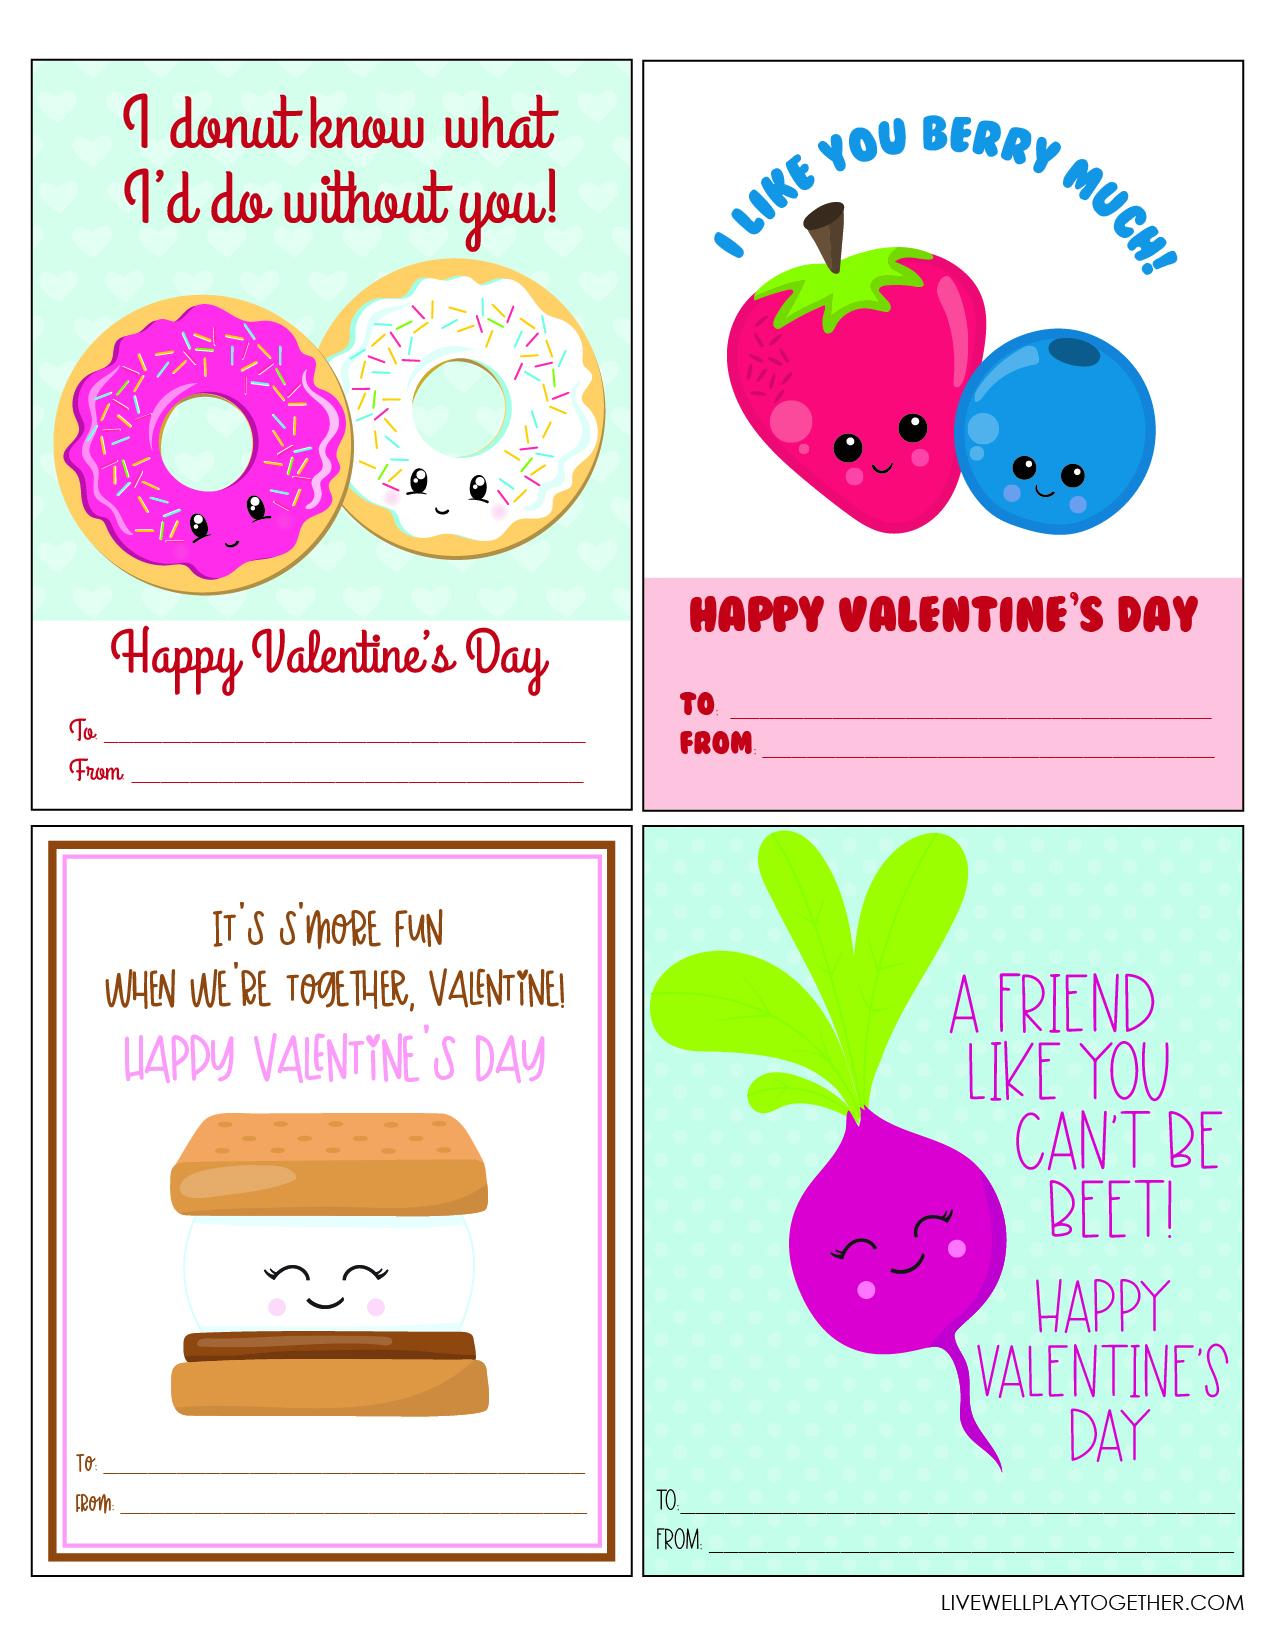 Funny Food Pun Valentine's Day Cards + Free Printable Live Well Play